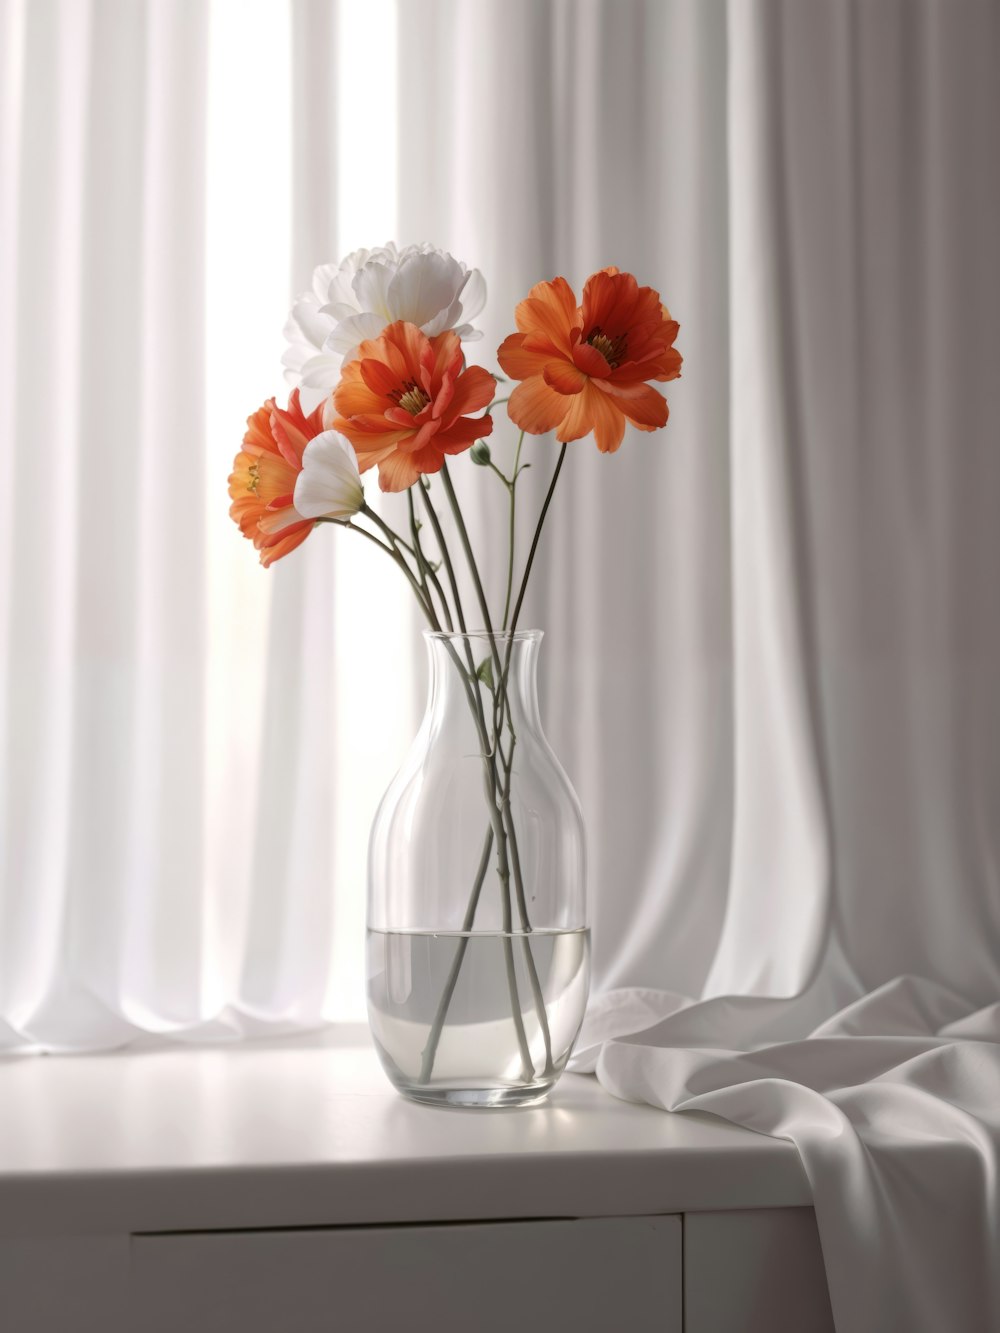 a glass vase filled with orange and white flowers